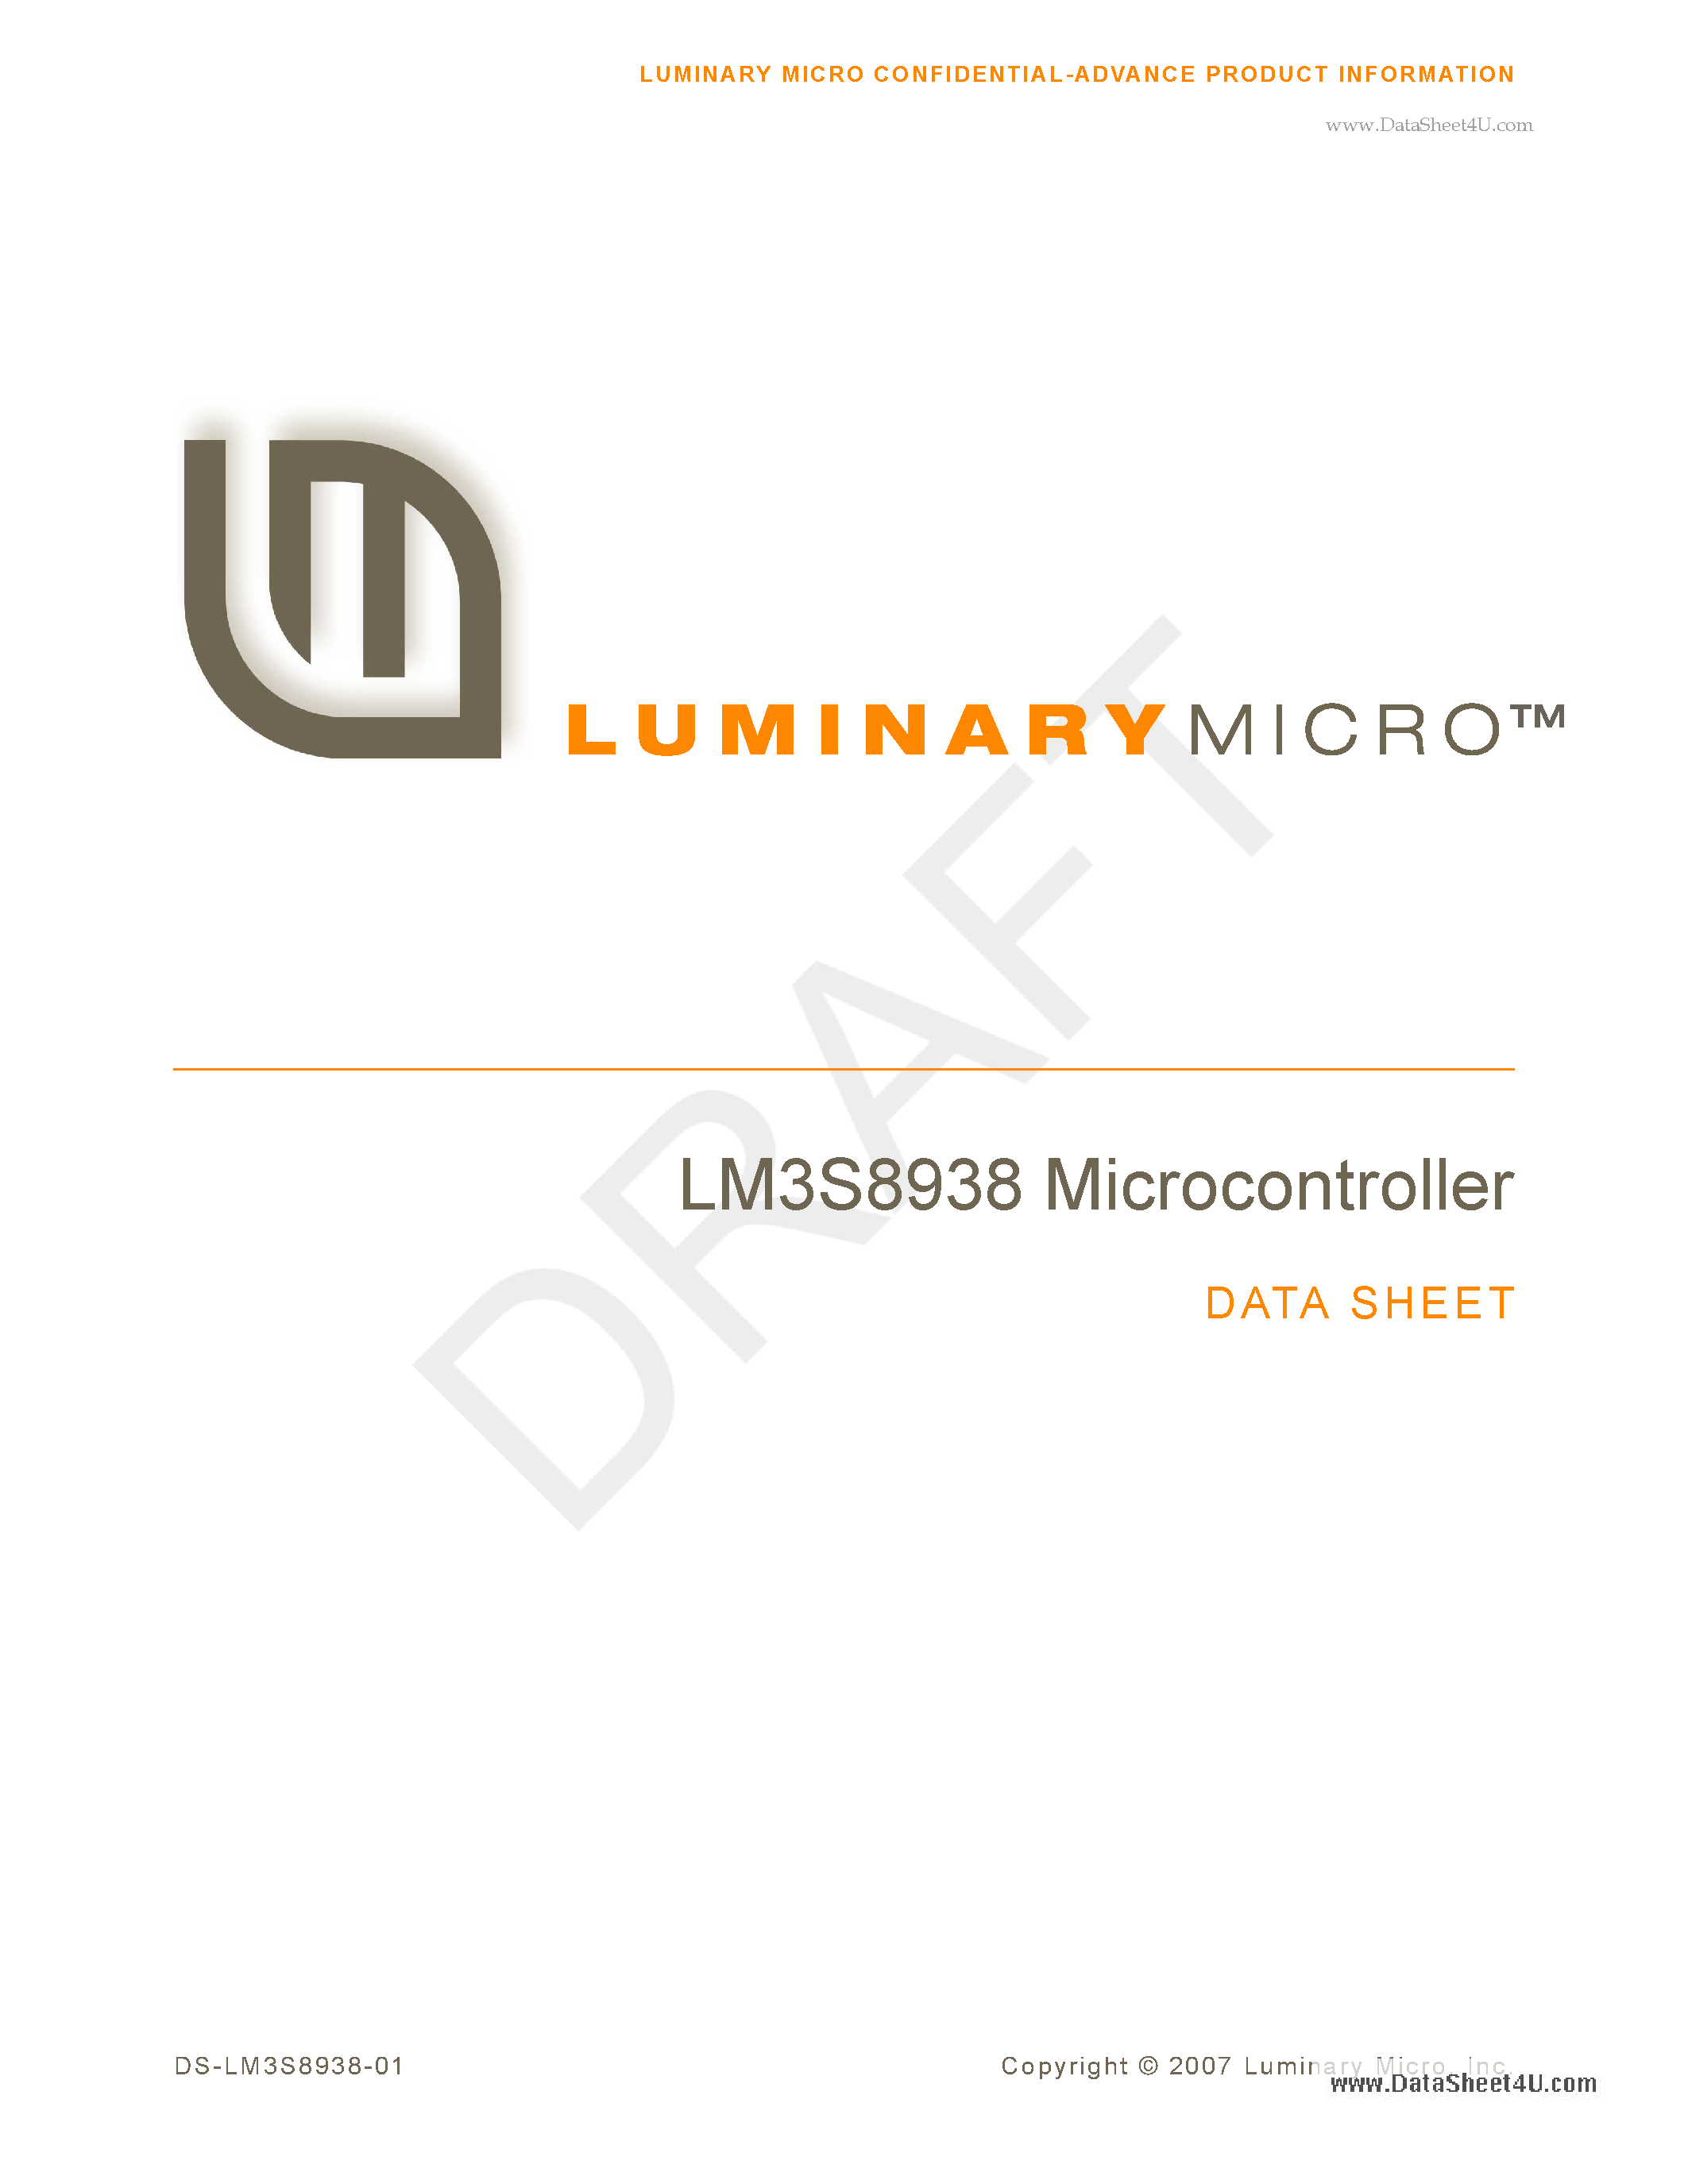 Datasheet LM3S8938 - Microcontroller page 1